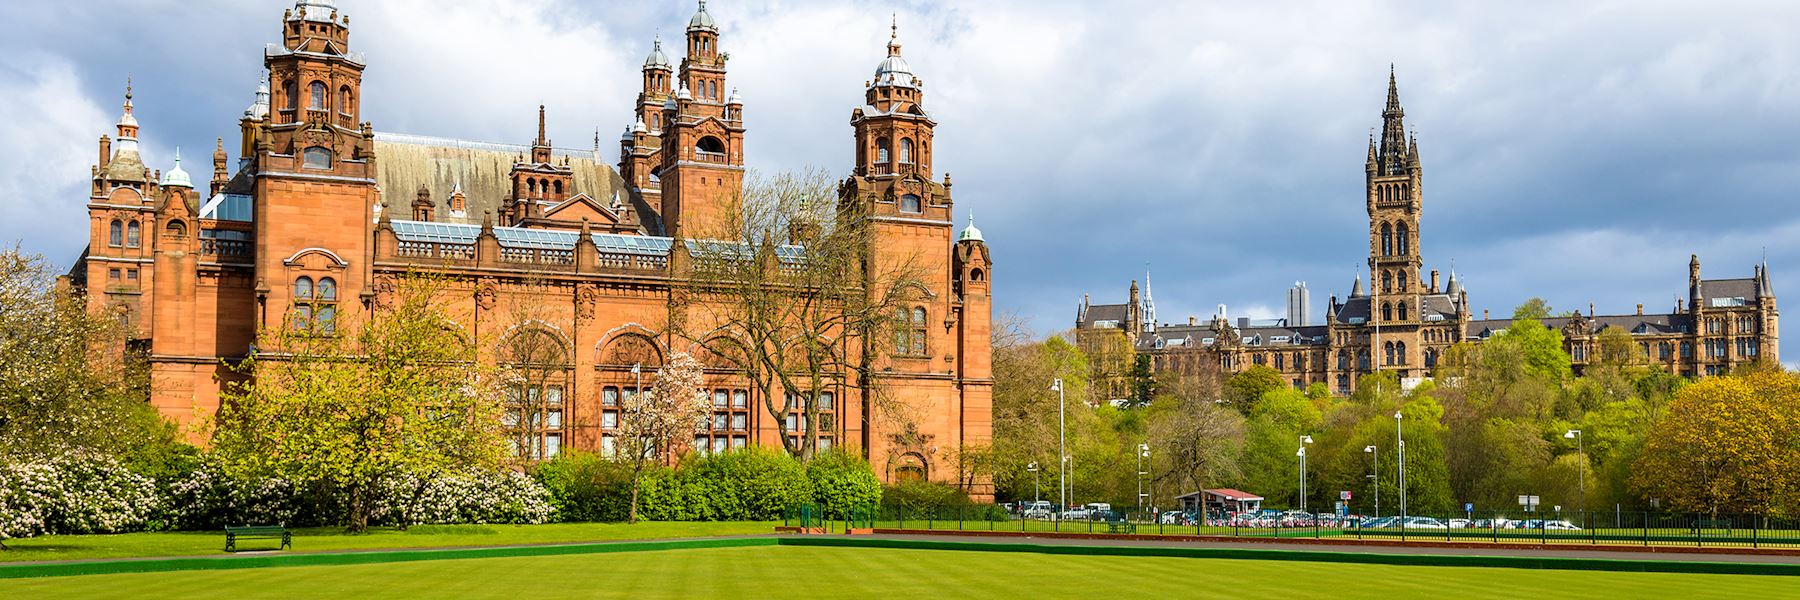 Tailor-made vacations to Glasgow | Audley Travel